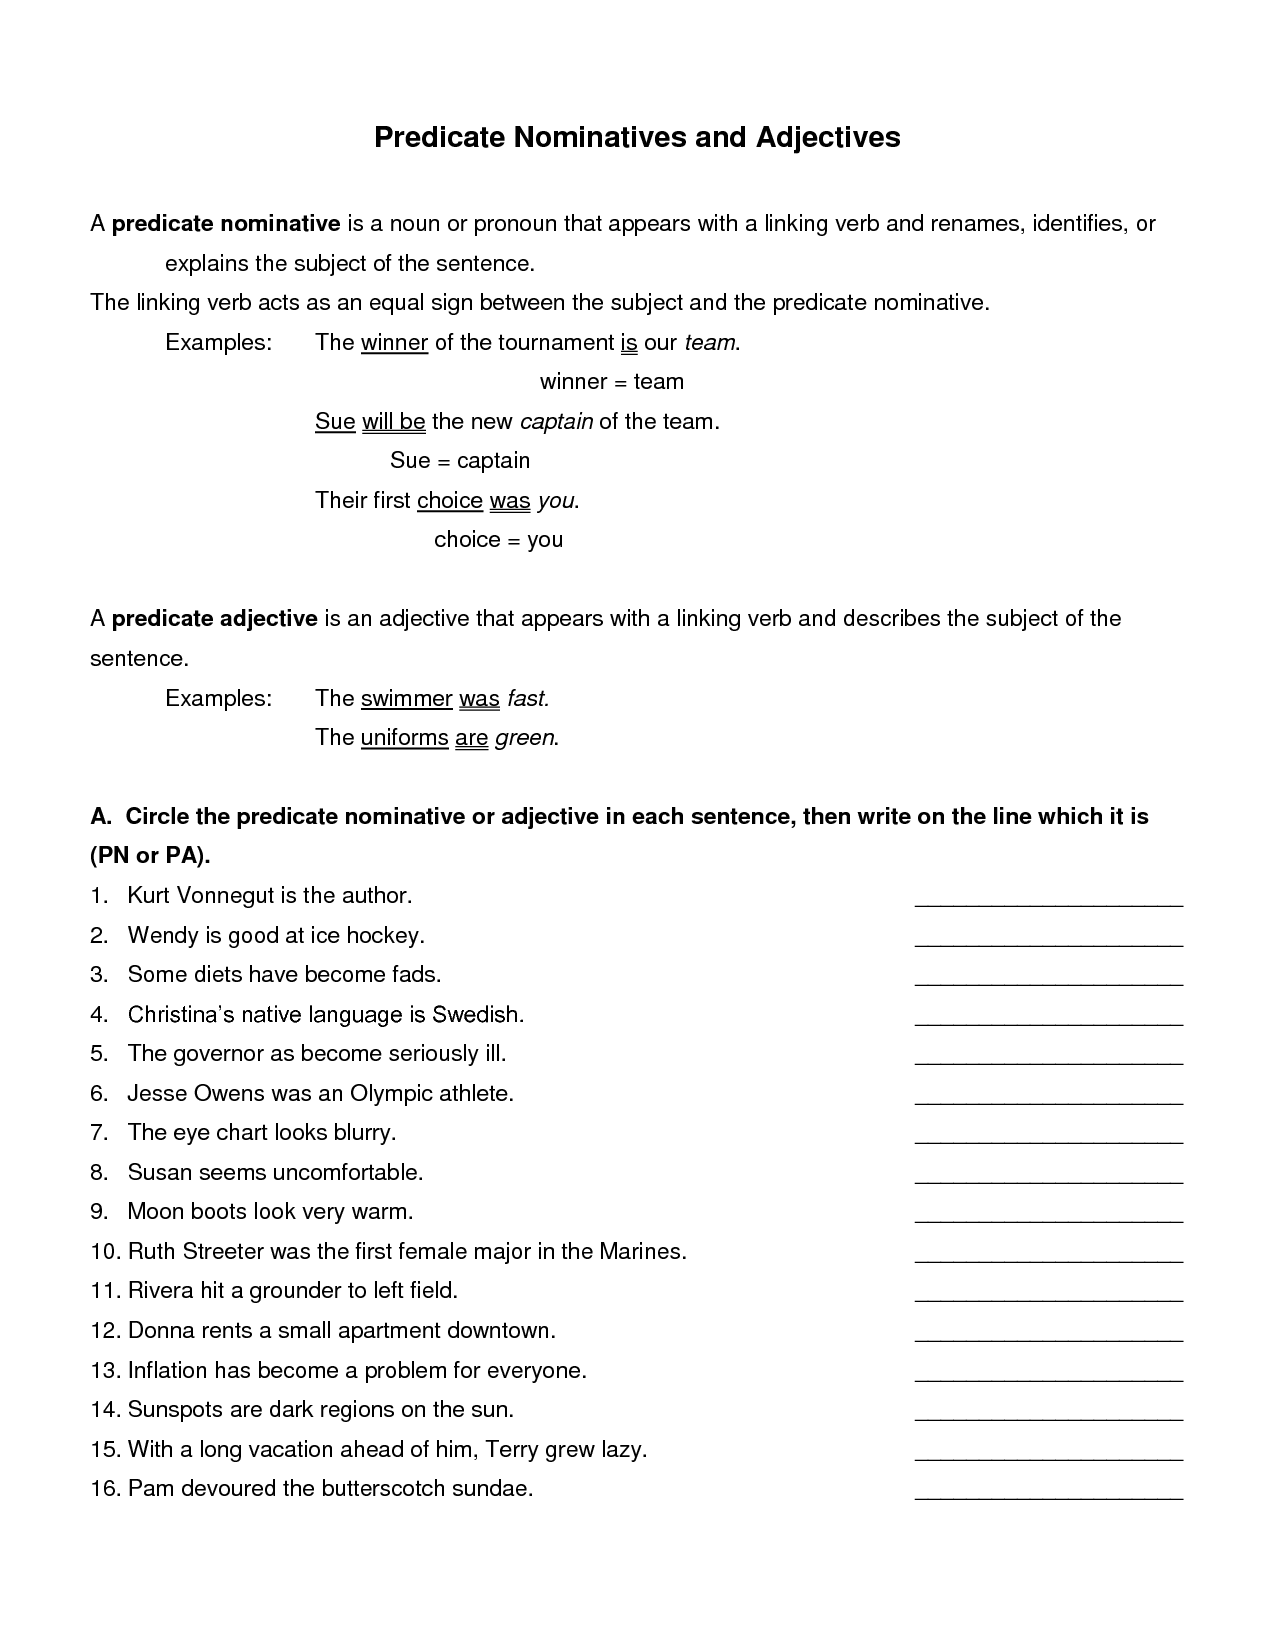 Predicate Nouns And Predicate Adjectives Worksheets With Answers